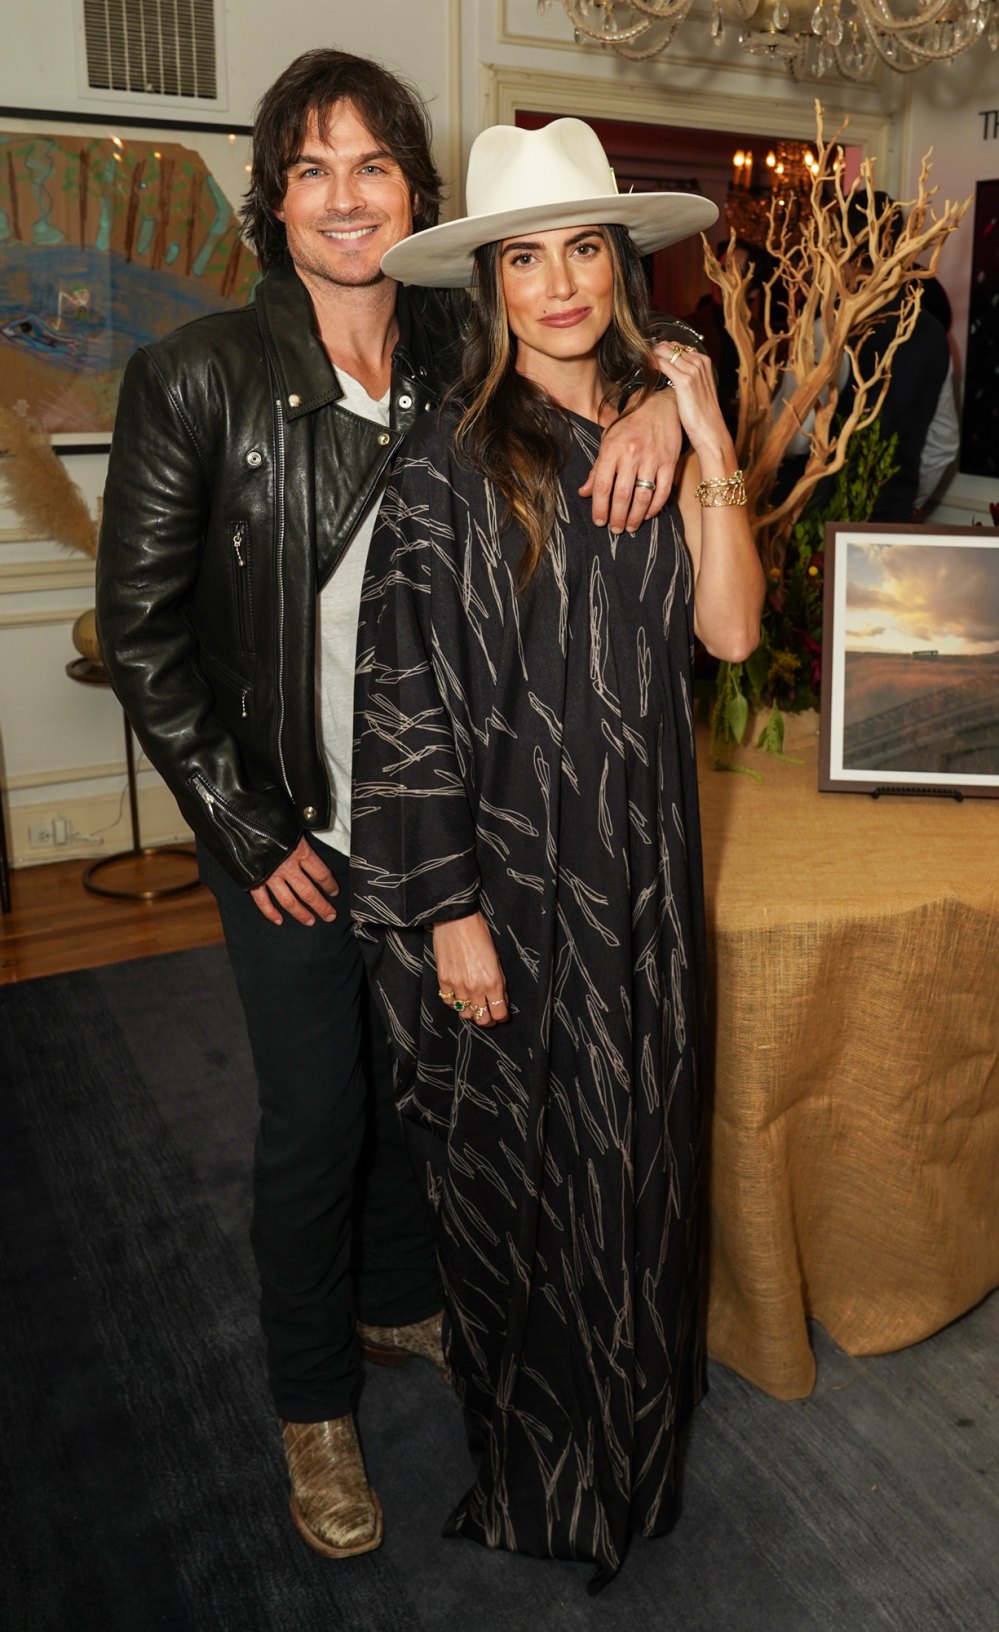 Ian Somerhalder and Nikki Reed Quotes About Leaving Hollywood Behind